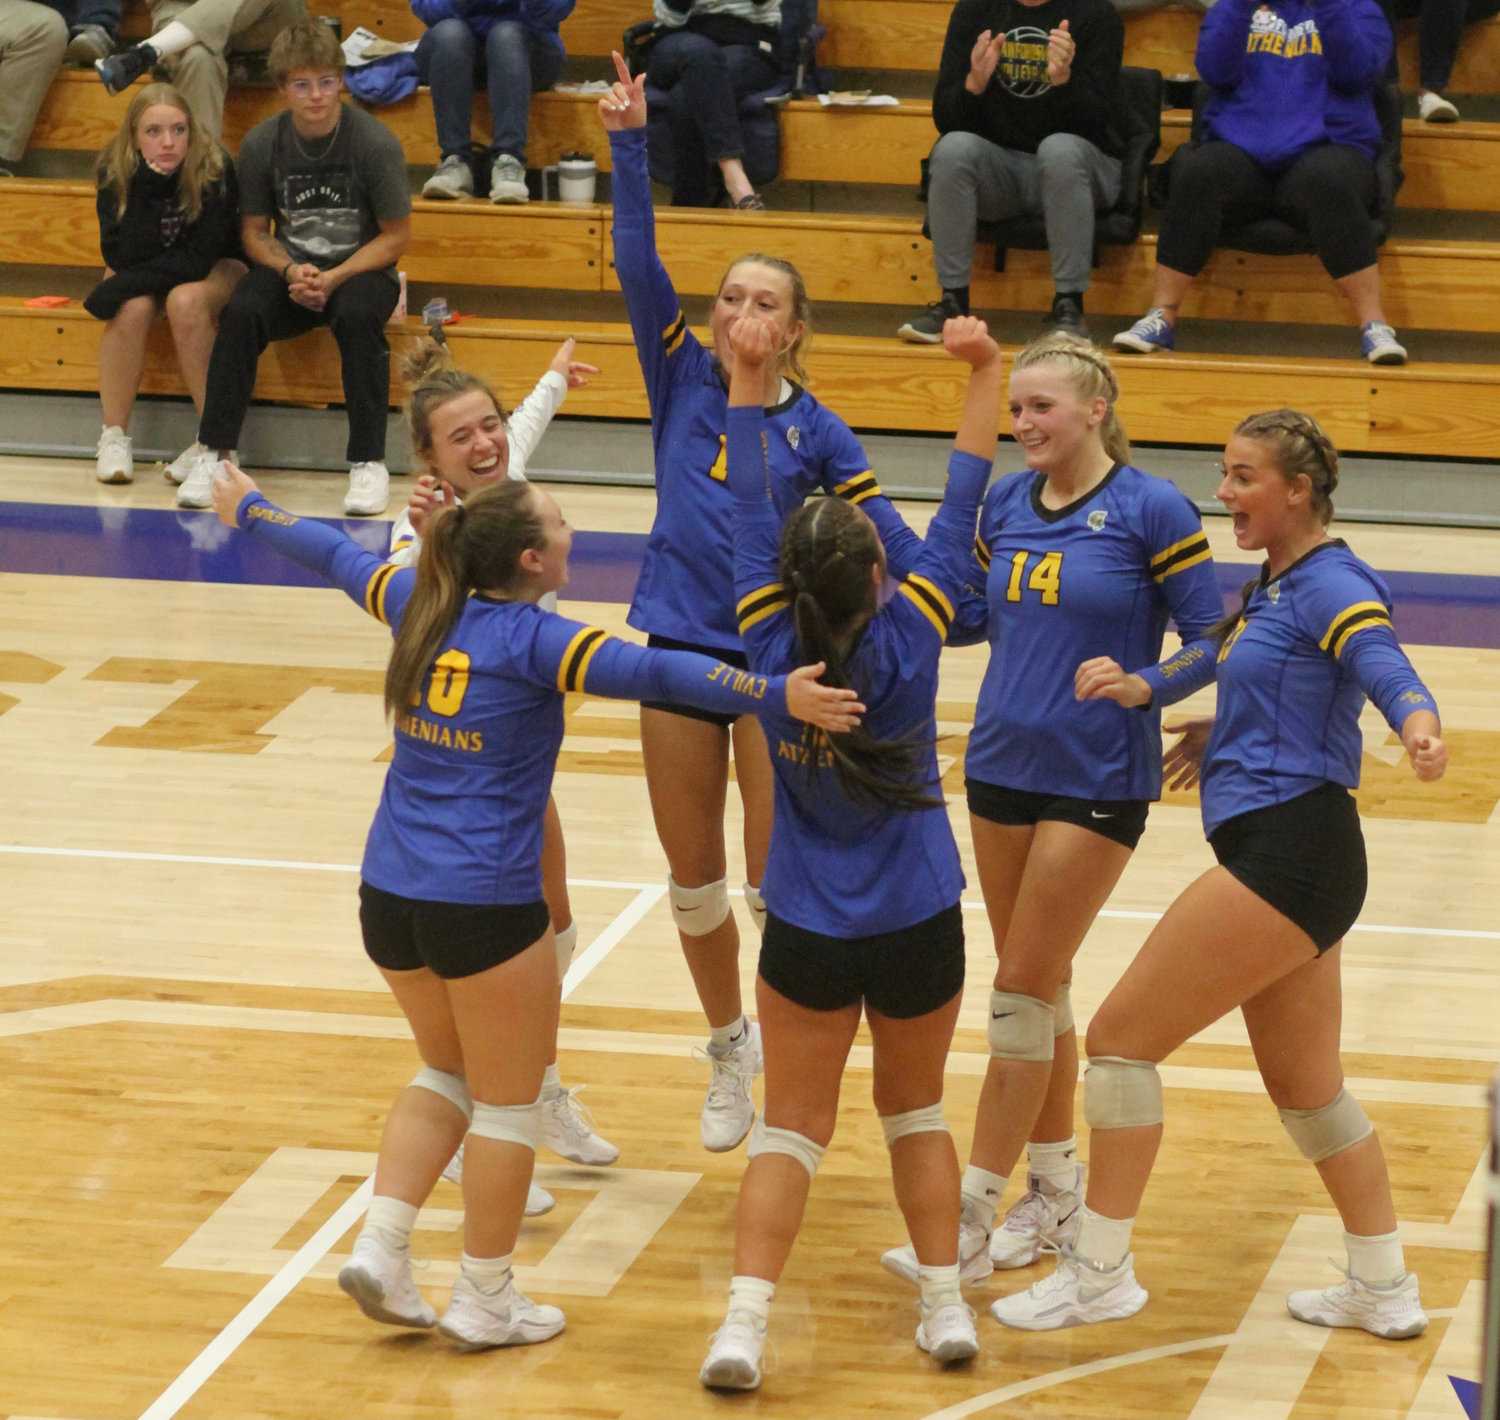 Crawfordsville celebrated senior Macy Bruton’s 2,000th kill of her career during their match against Western Boone.